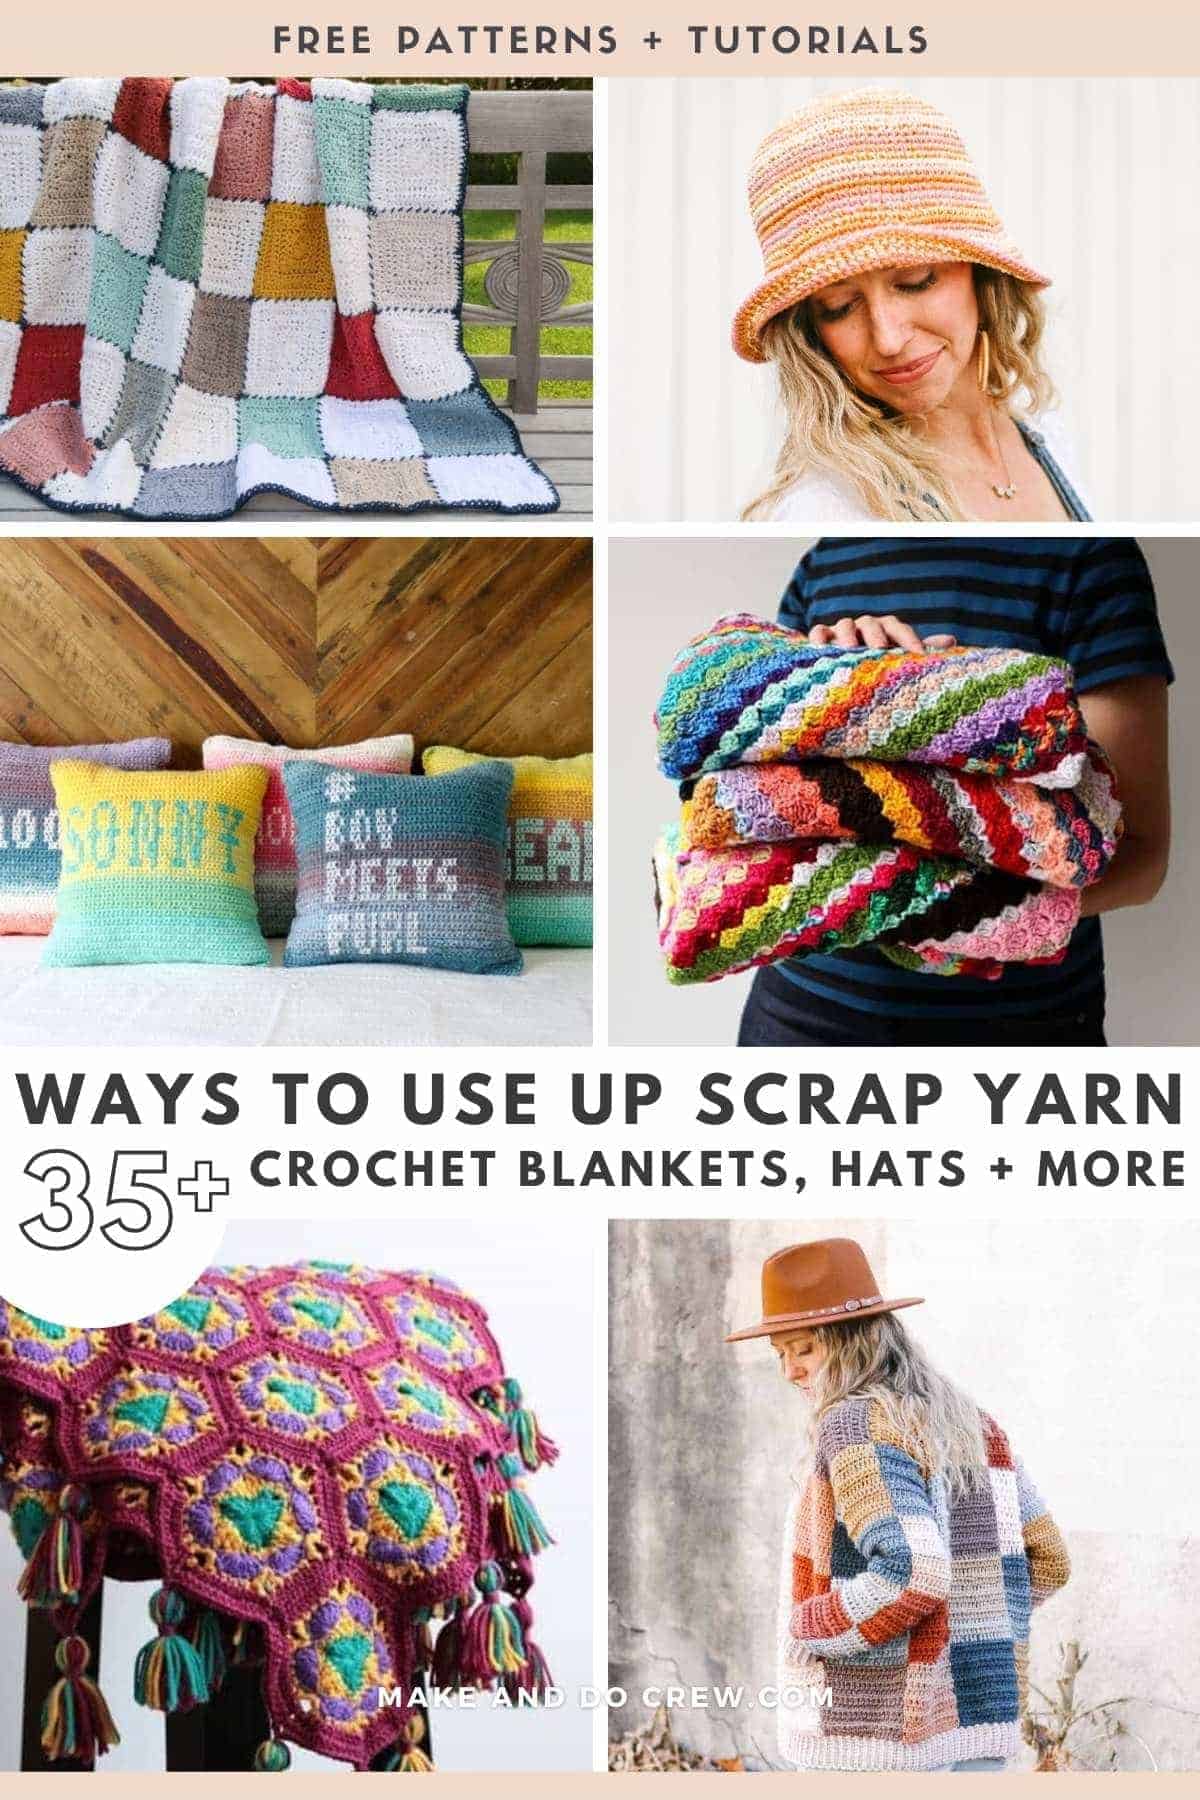 A grid of different crochet projects made with scrap yarn.